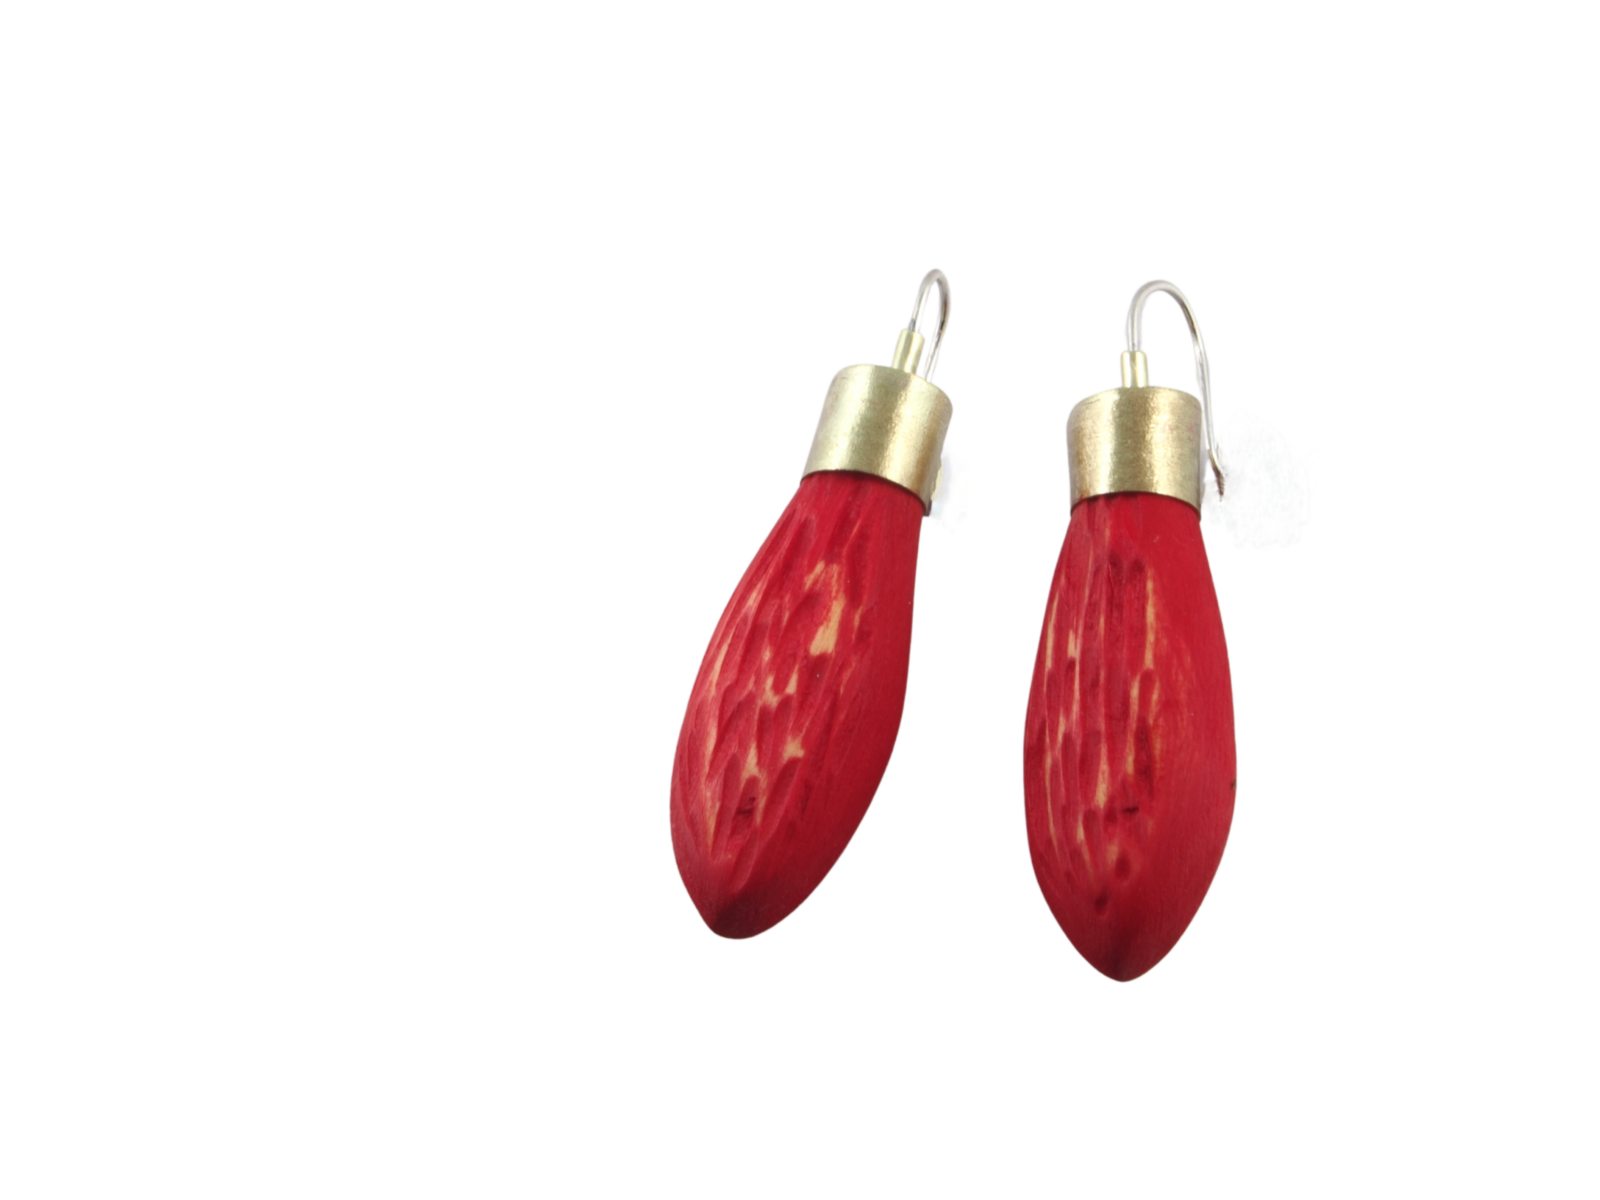 textured landscape (red) earrings